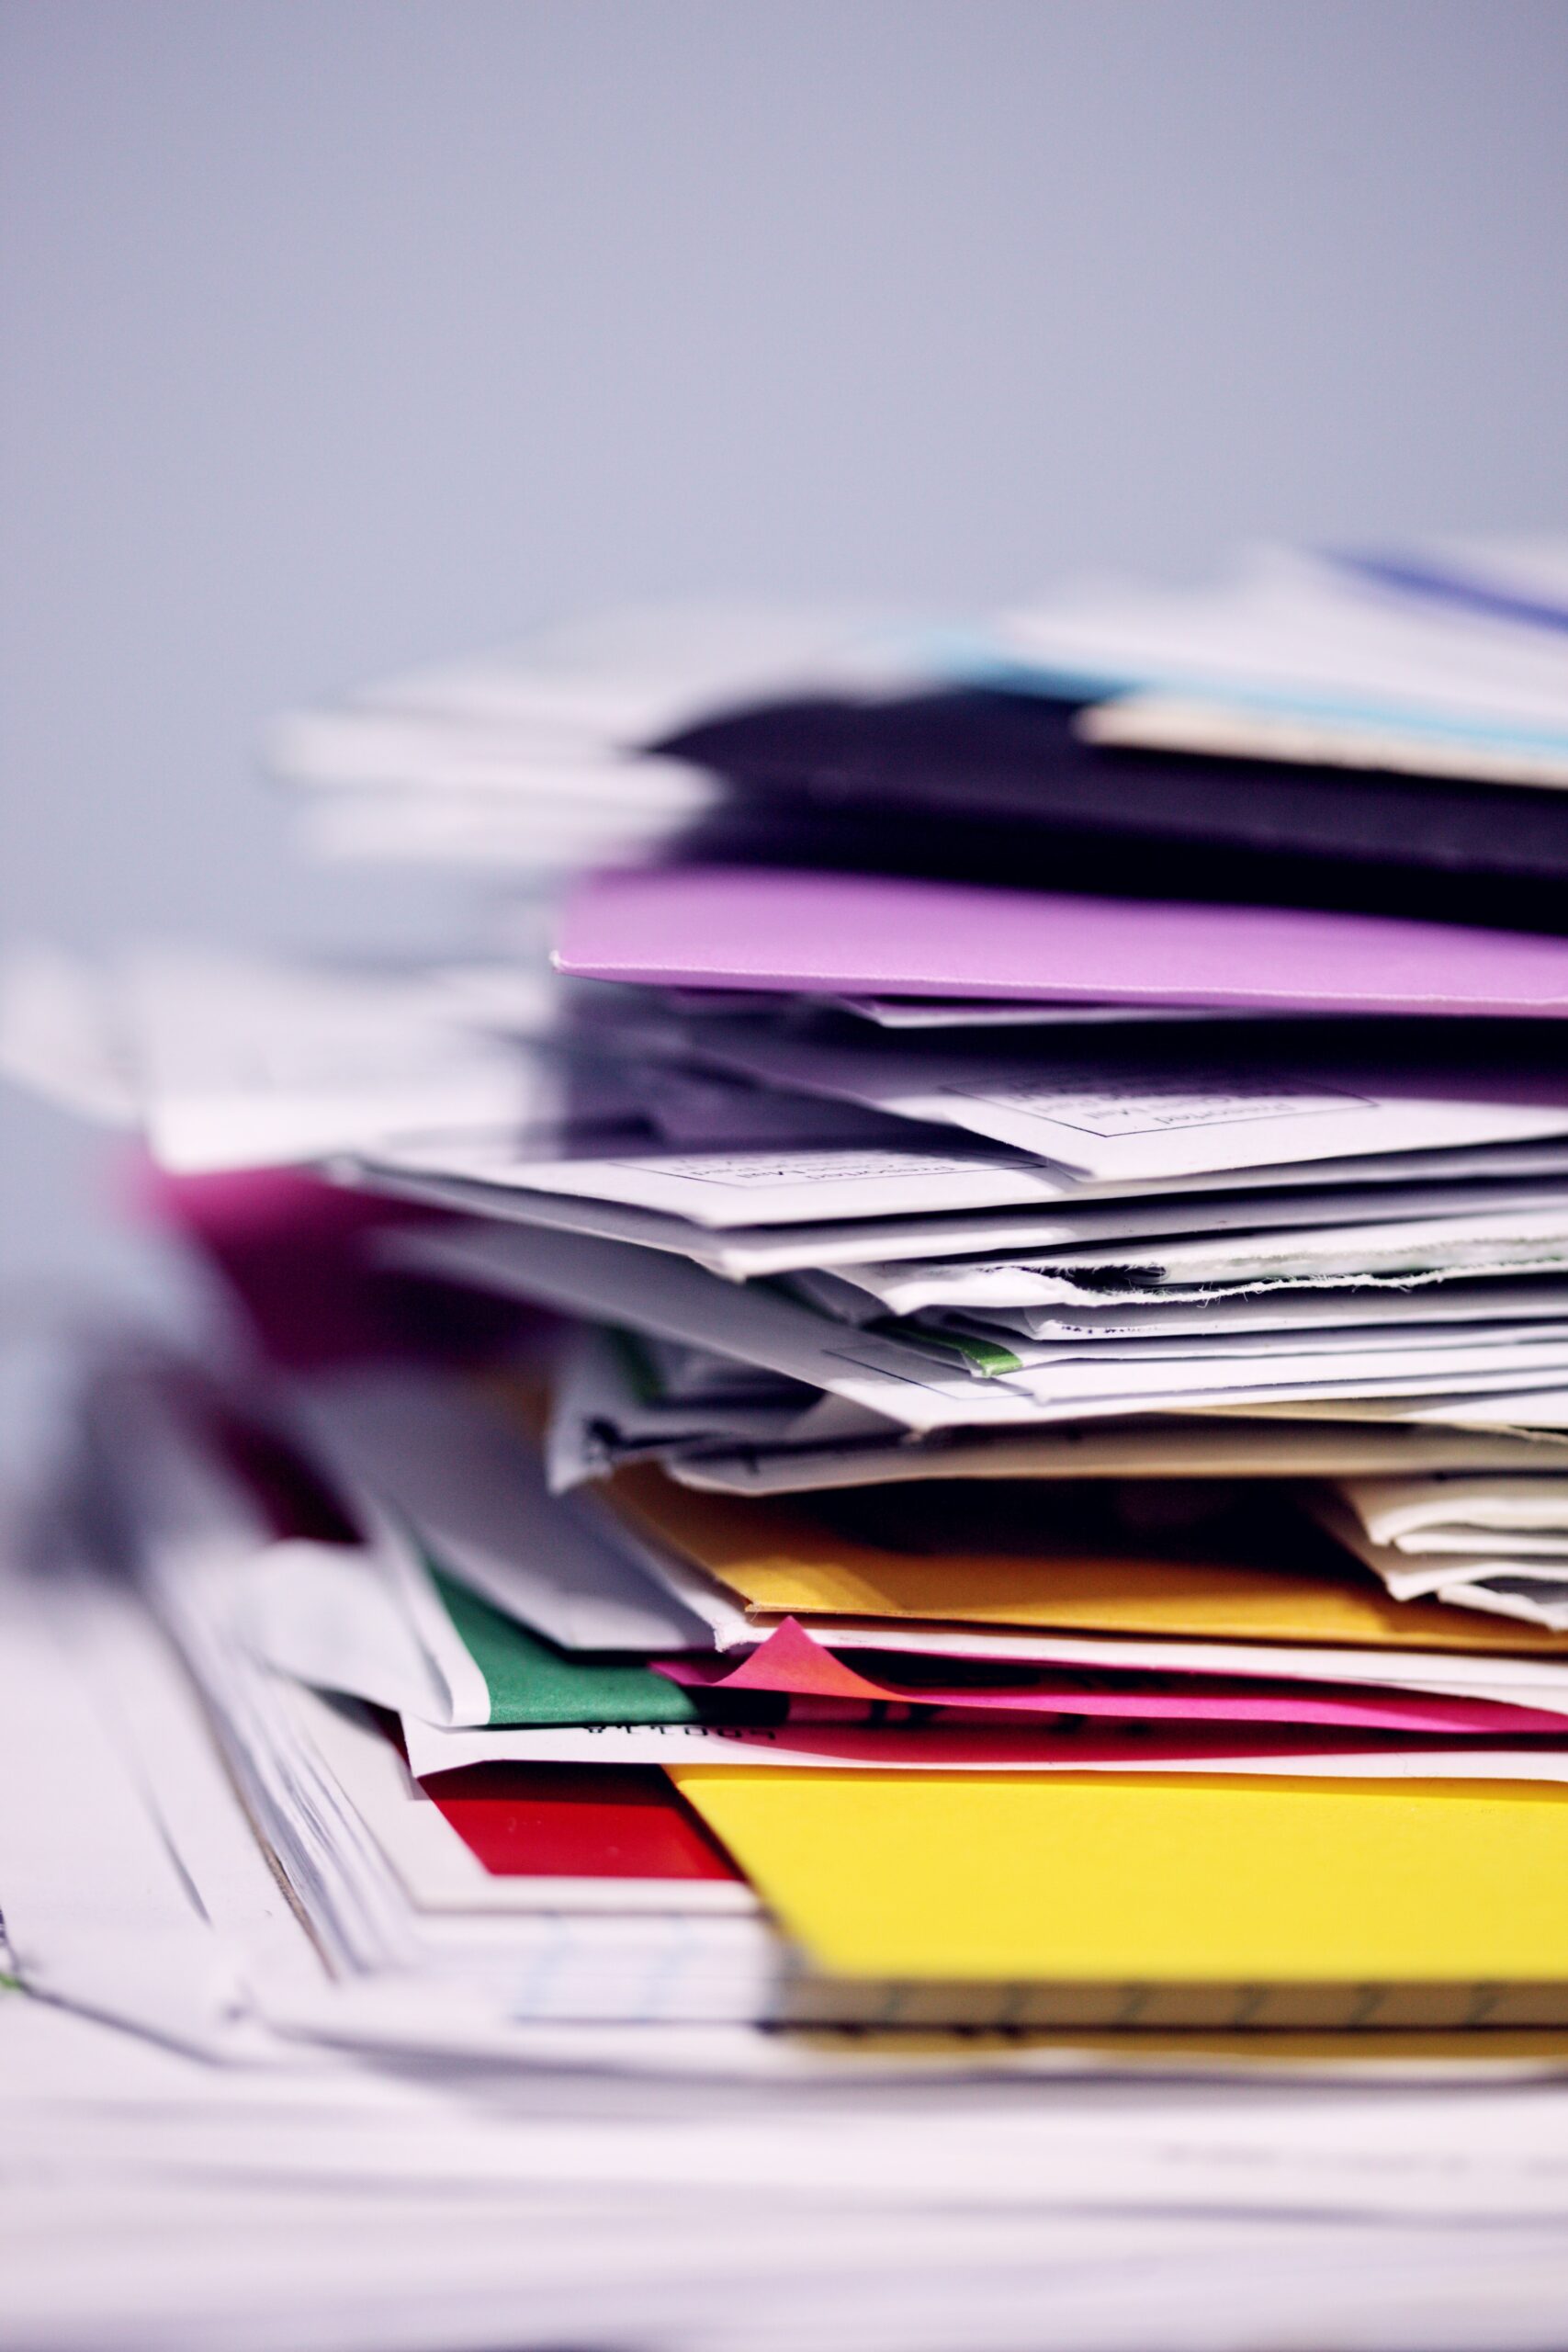 A pile of folders and papers are stacked up for the entirety of the photo. Some of the papers are folded, and the pile looks in disarray. The folders are brightly coloured and stand out.